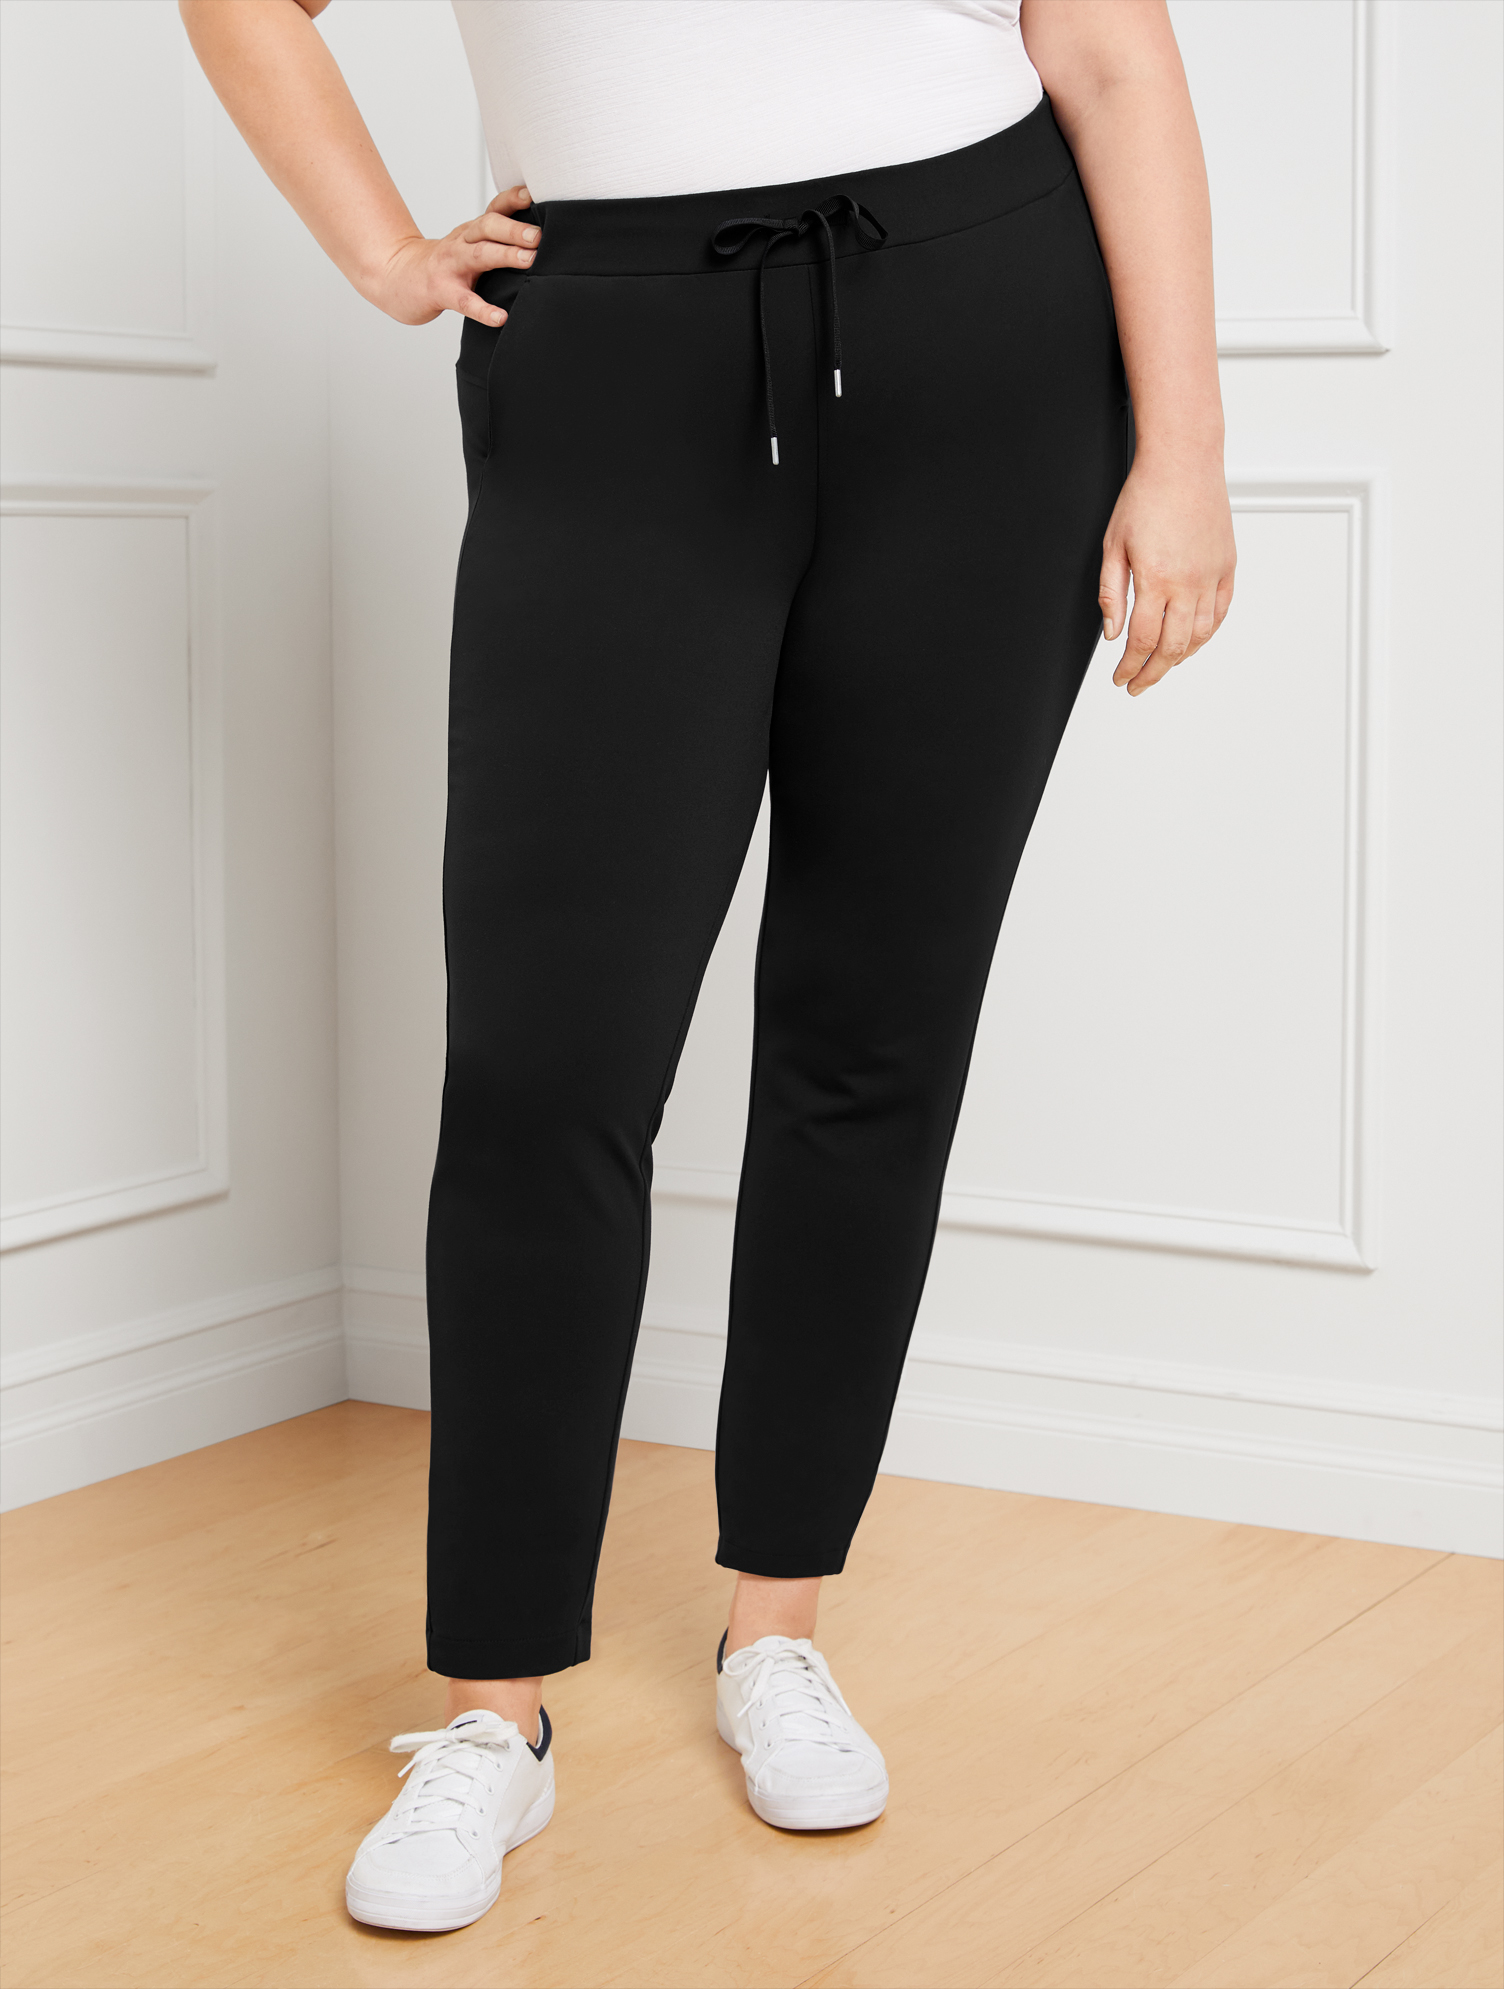 Talbots Out & About Stretch Jogger Pants - Black - 1x